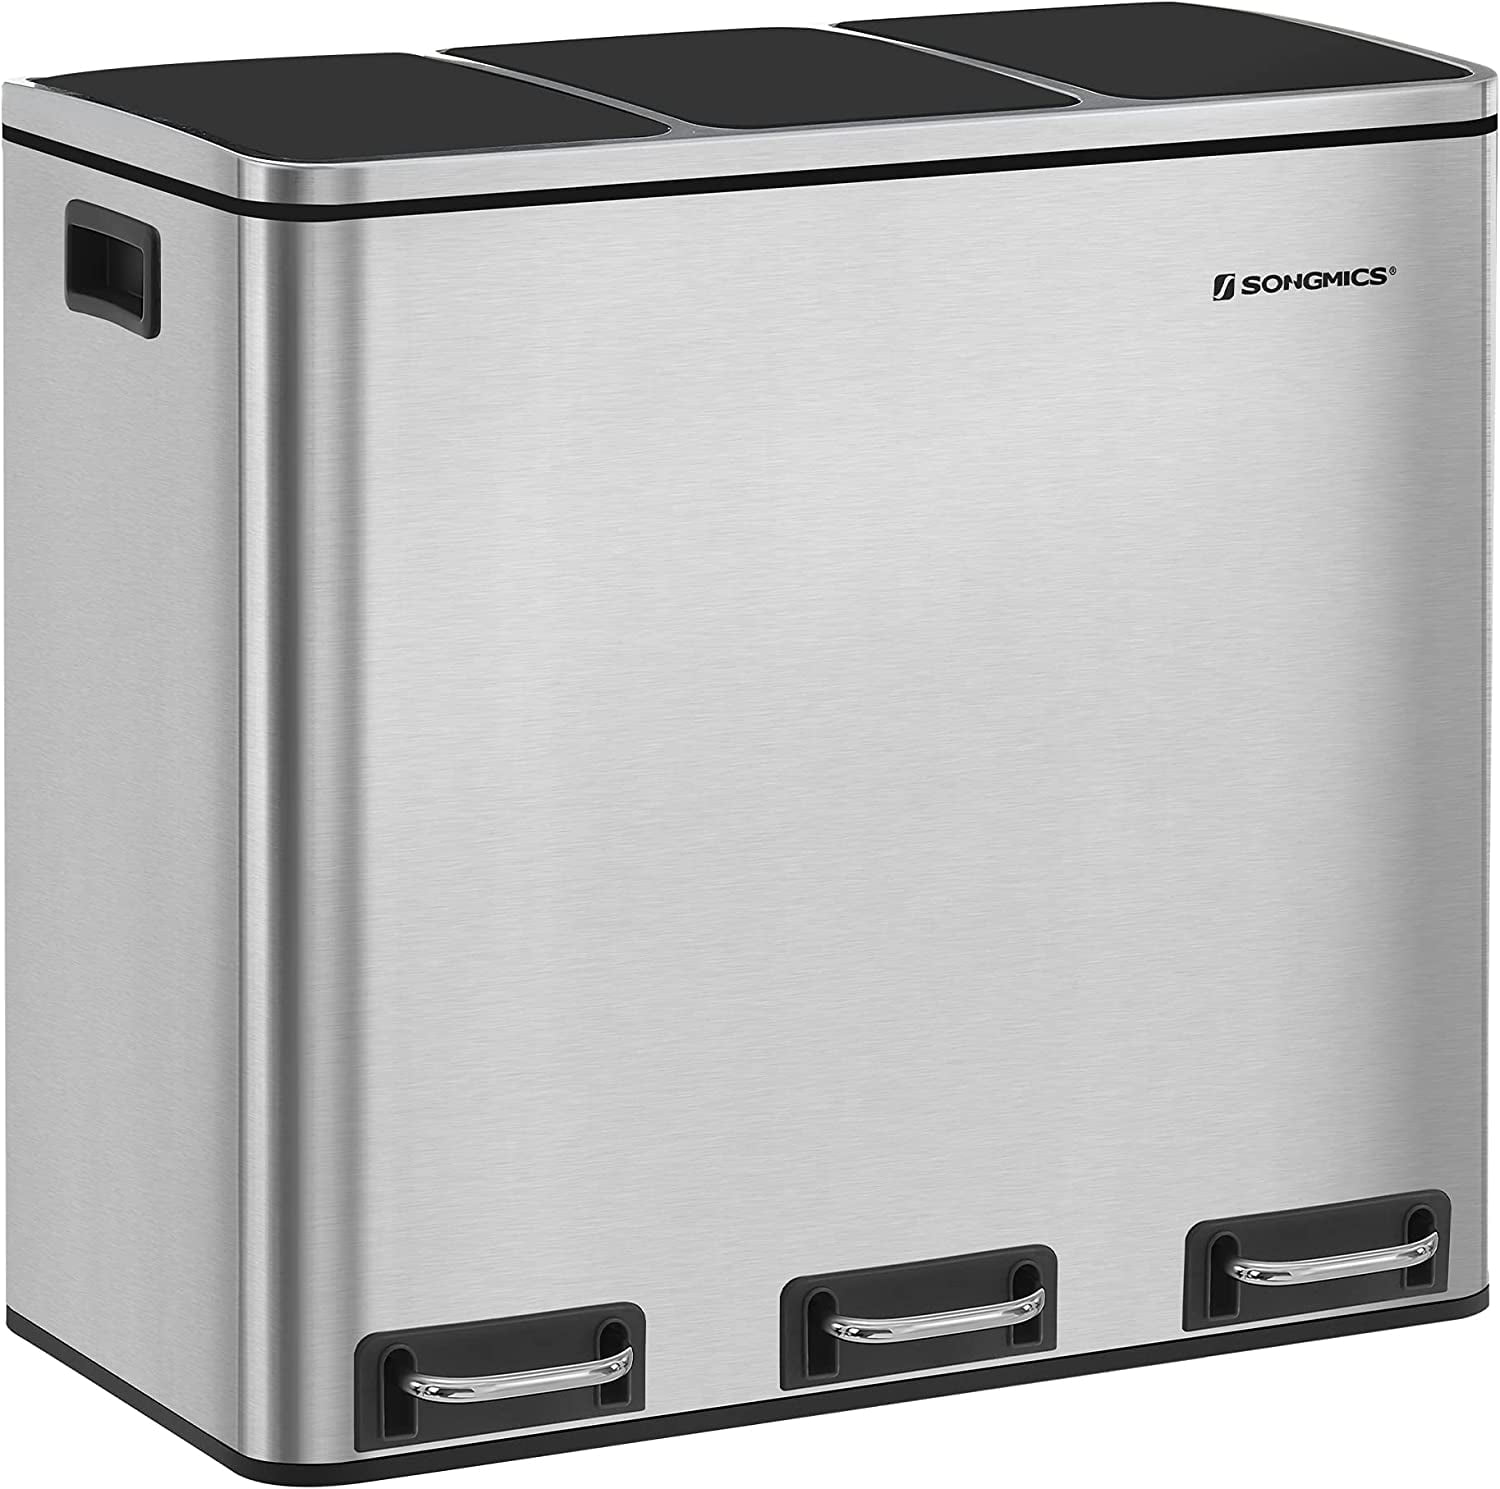 Specificiteit Artistiek gekruld SONGMICS 3 x 4.8 Gallon Garbage Can Trash Can 14.4 Gallon Recycle Bin with  Soft-Close Lids for Kitchen Silver and Black - Walmart.com